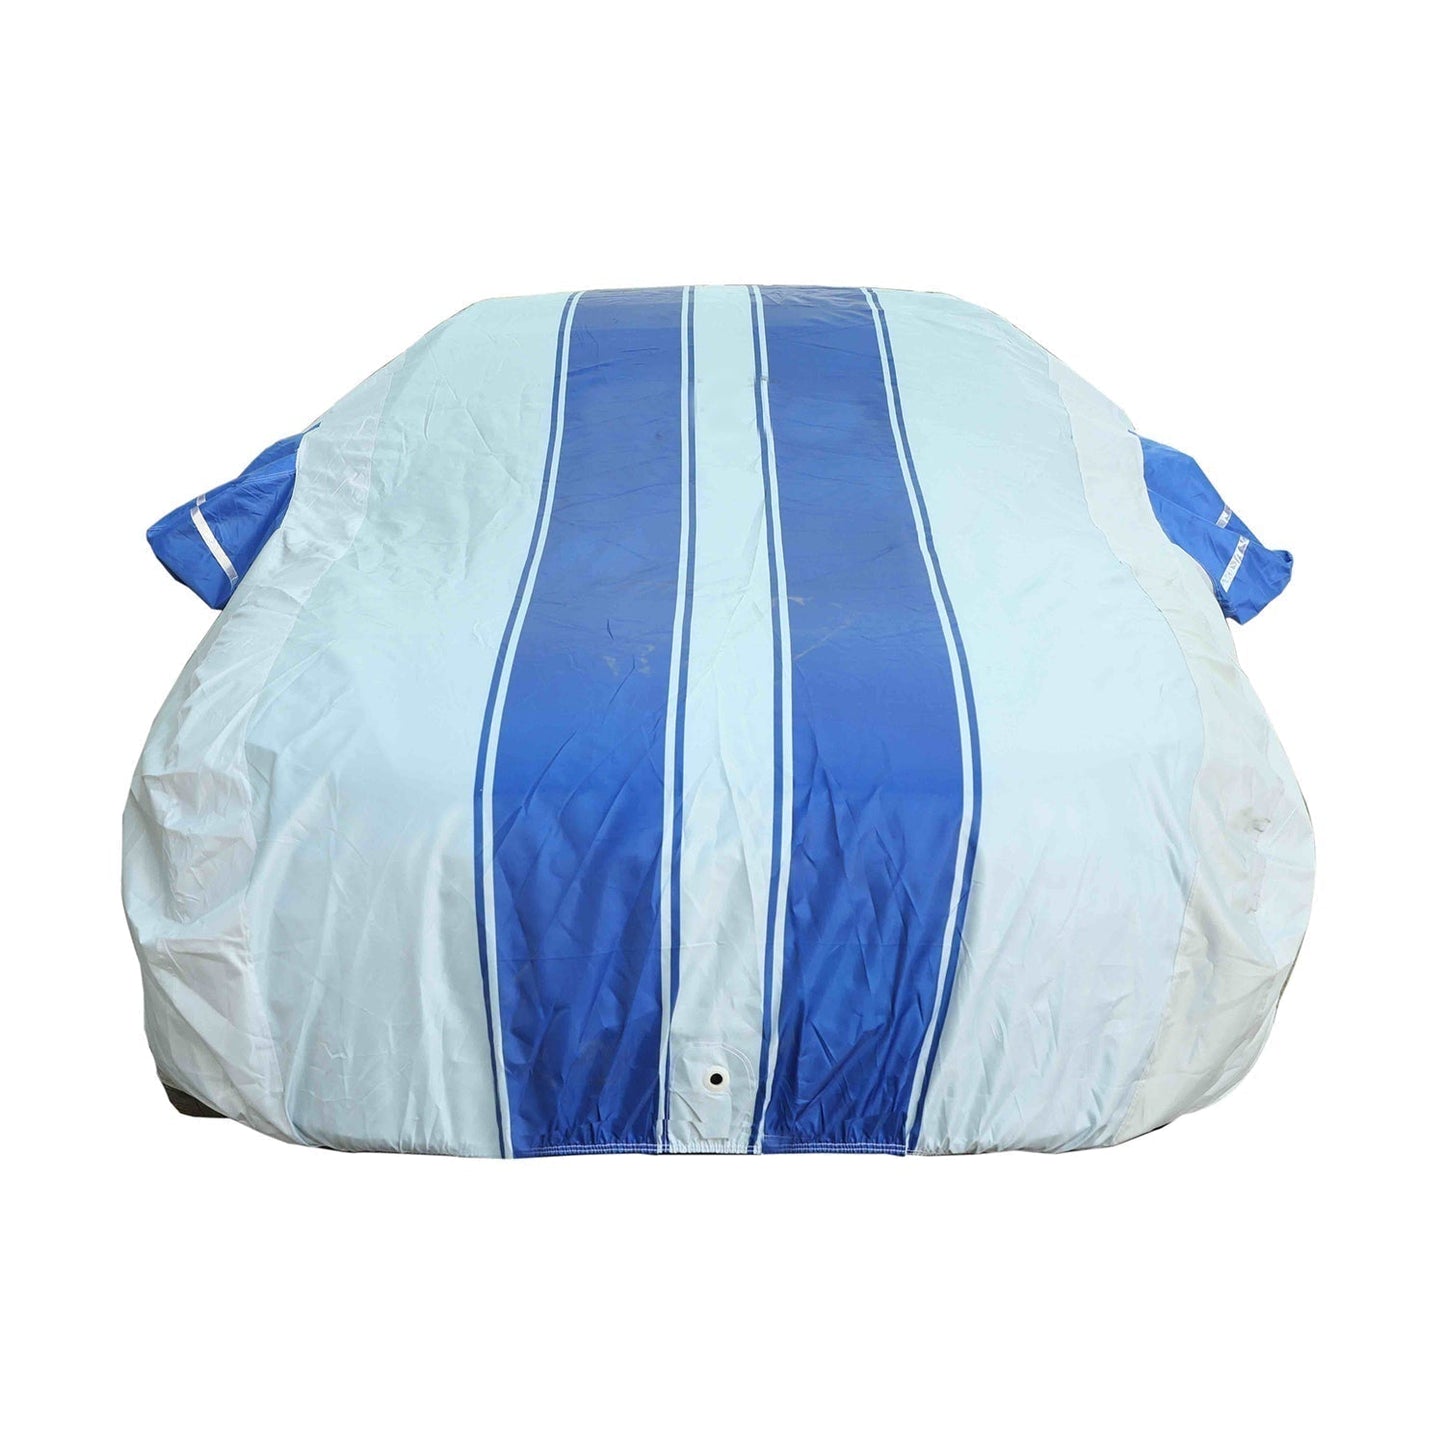 Oshotto 100% Blue dustproof and Water Resistant Car Body Cover with Mirror Pockets For Skoda Octavia